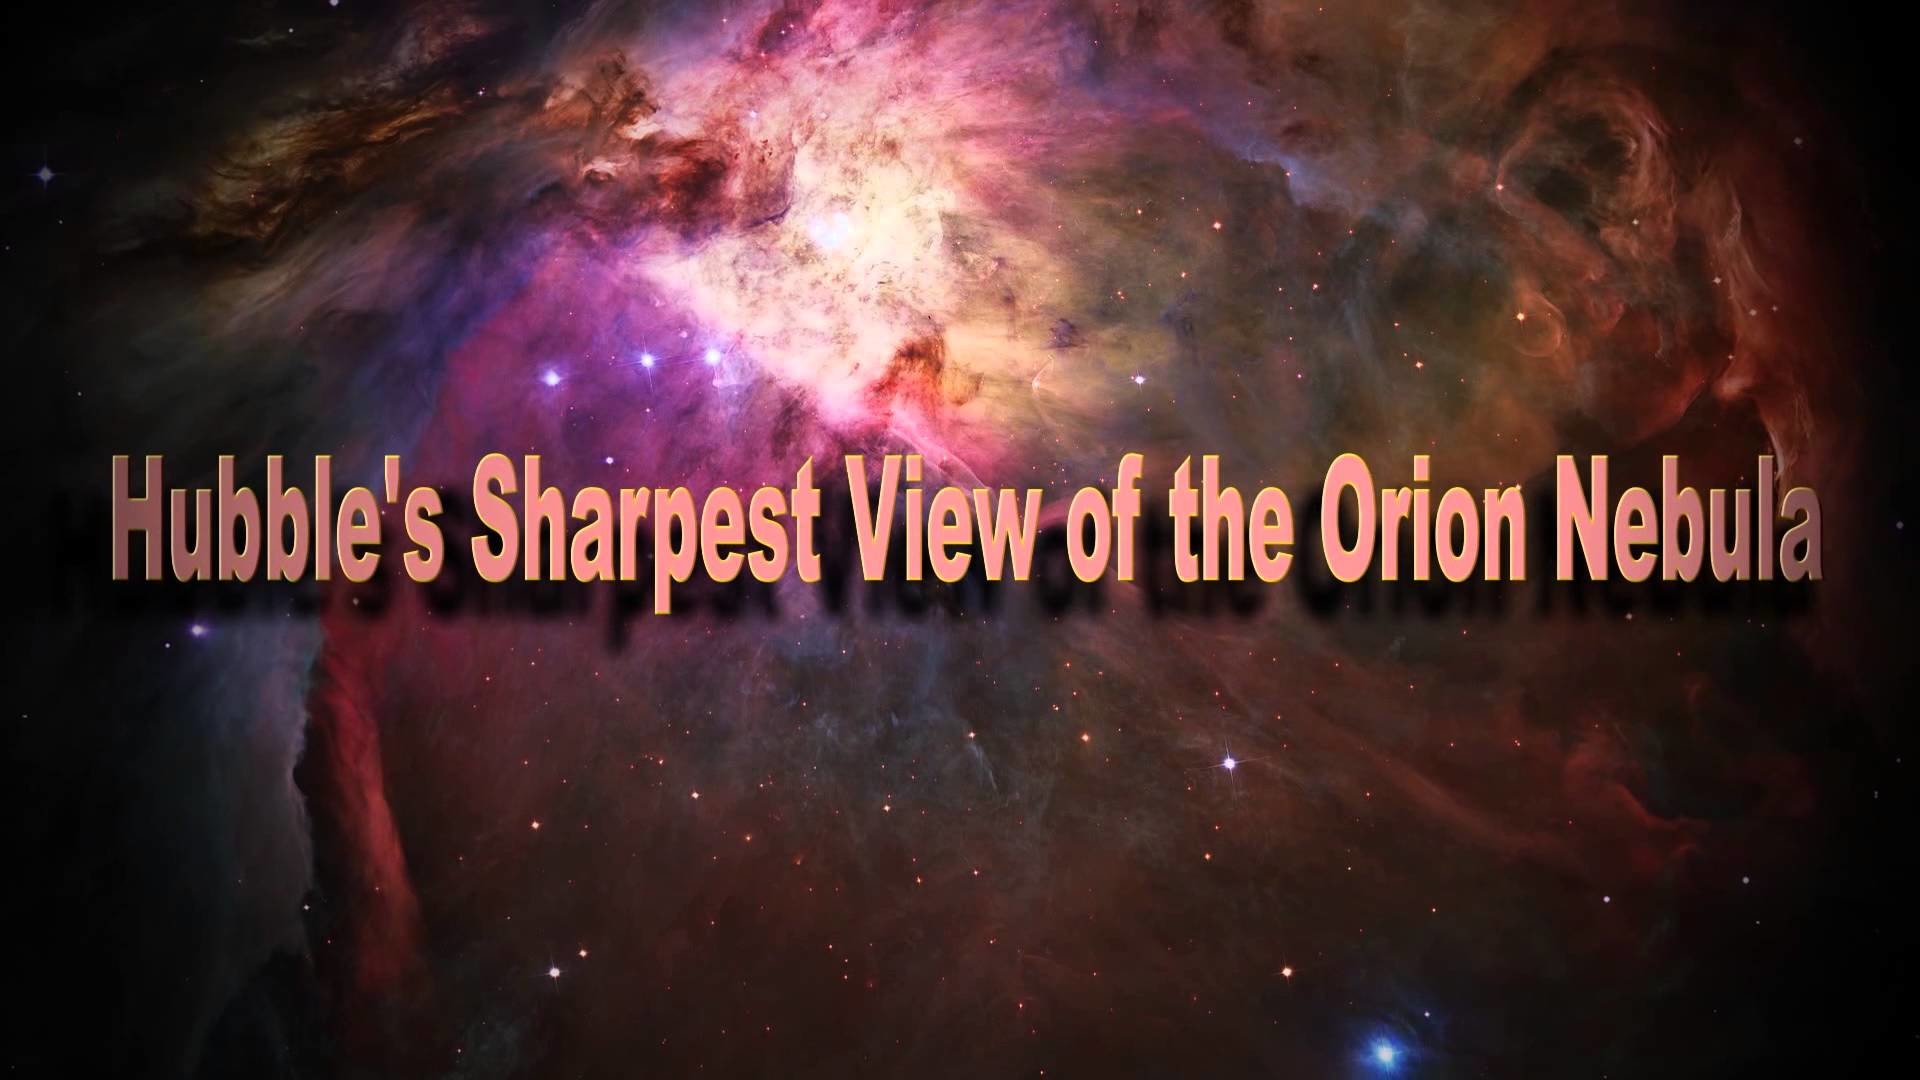 1920x1080 Hubble's Sharpest View of the Orion Nebula